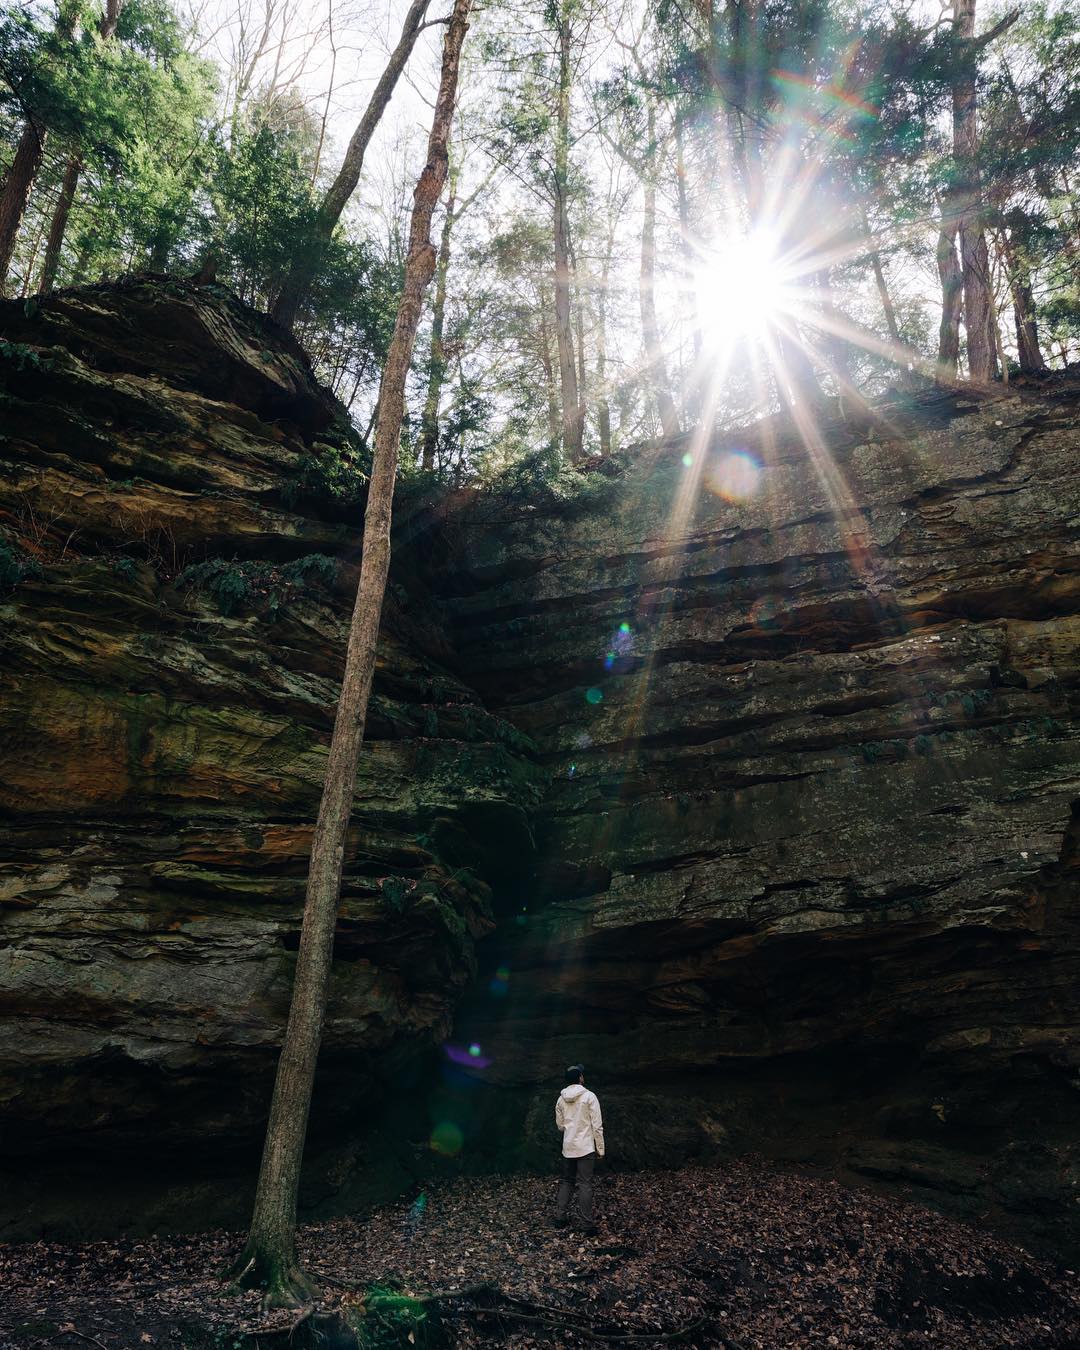 There are over 8 state parks about an hour drive radius from Indy. Shades State Park, my personal favorite, offers terrain you generally don’t see in Indiana. Grab a to-go lunch and some snacks to take a day trip out here for all the hiking and canoeing possibilities.